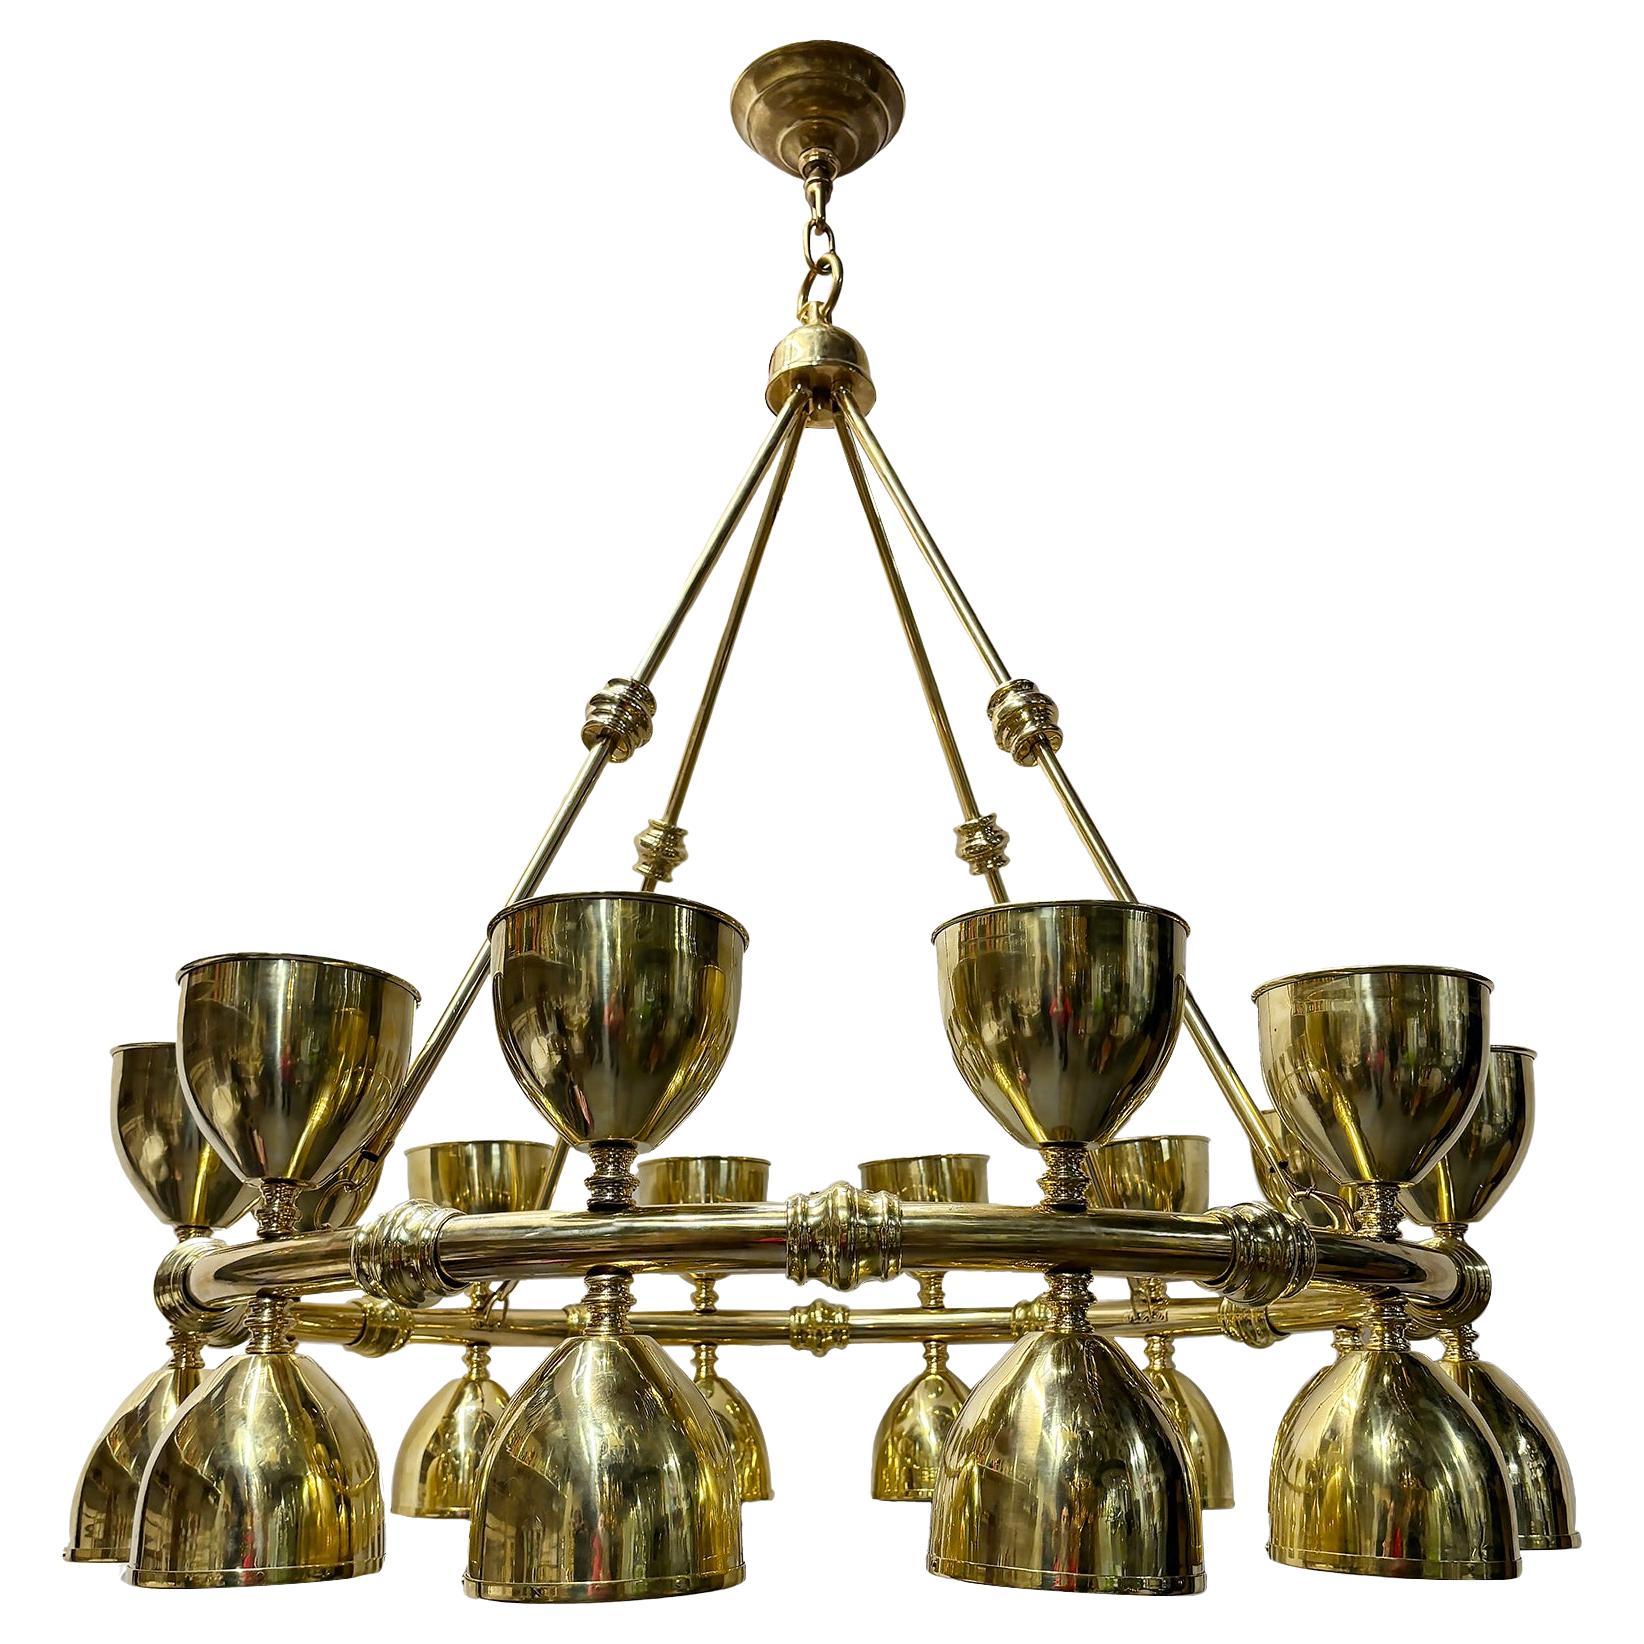 A Large Midcentury Brass Chandelier